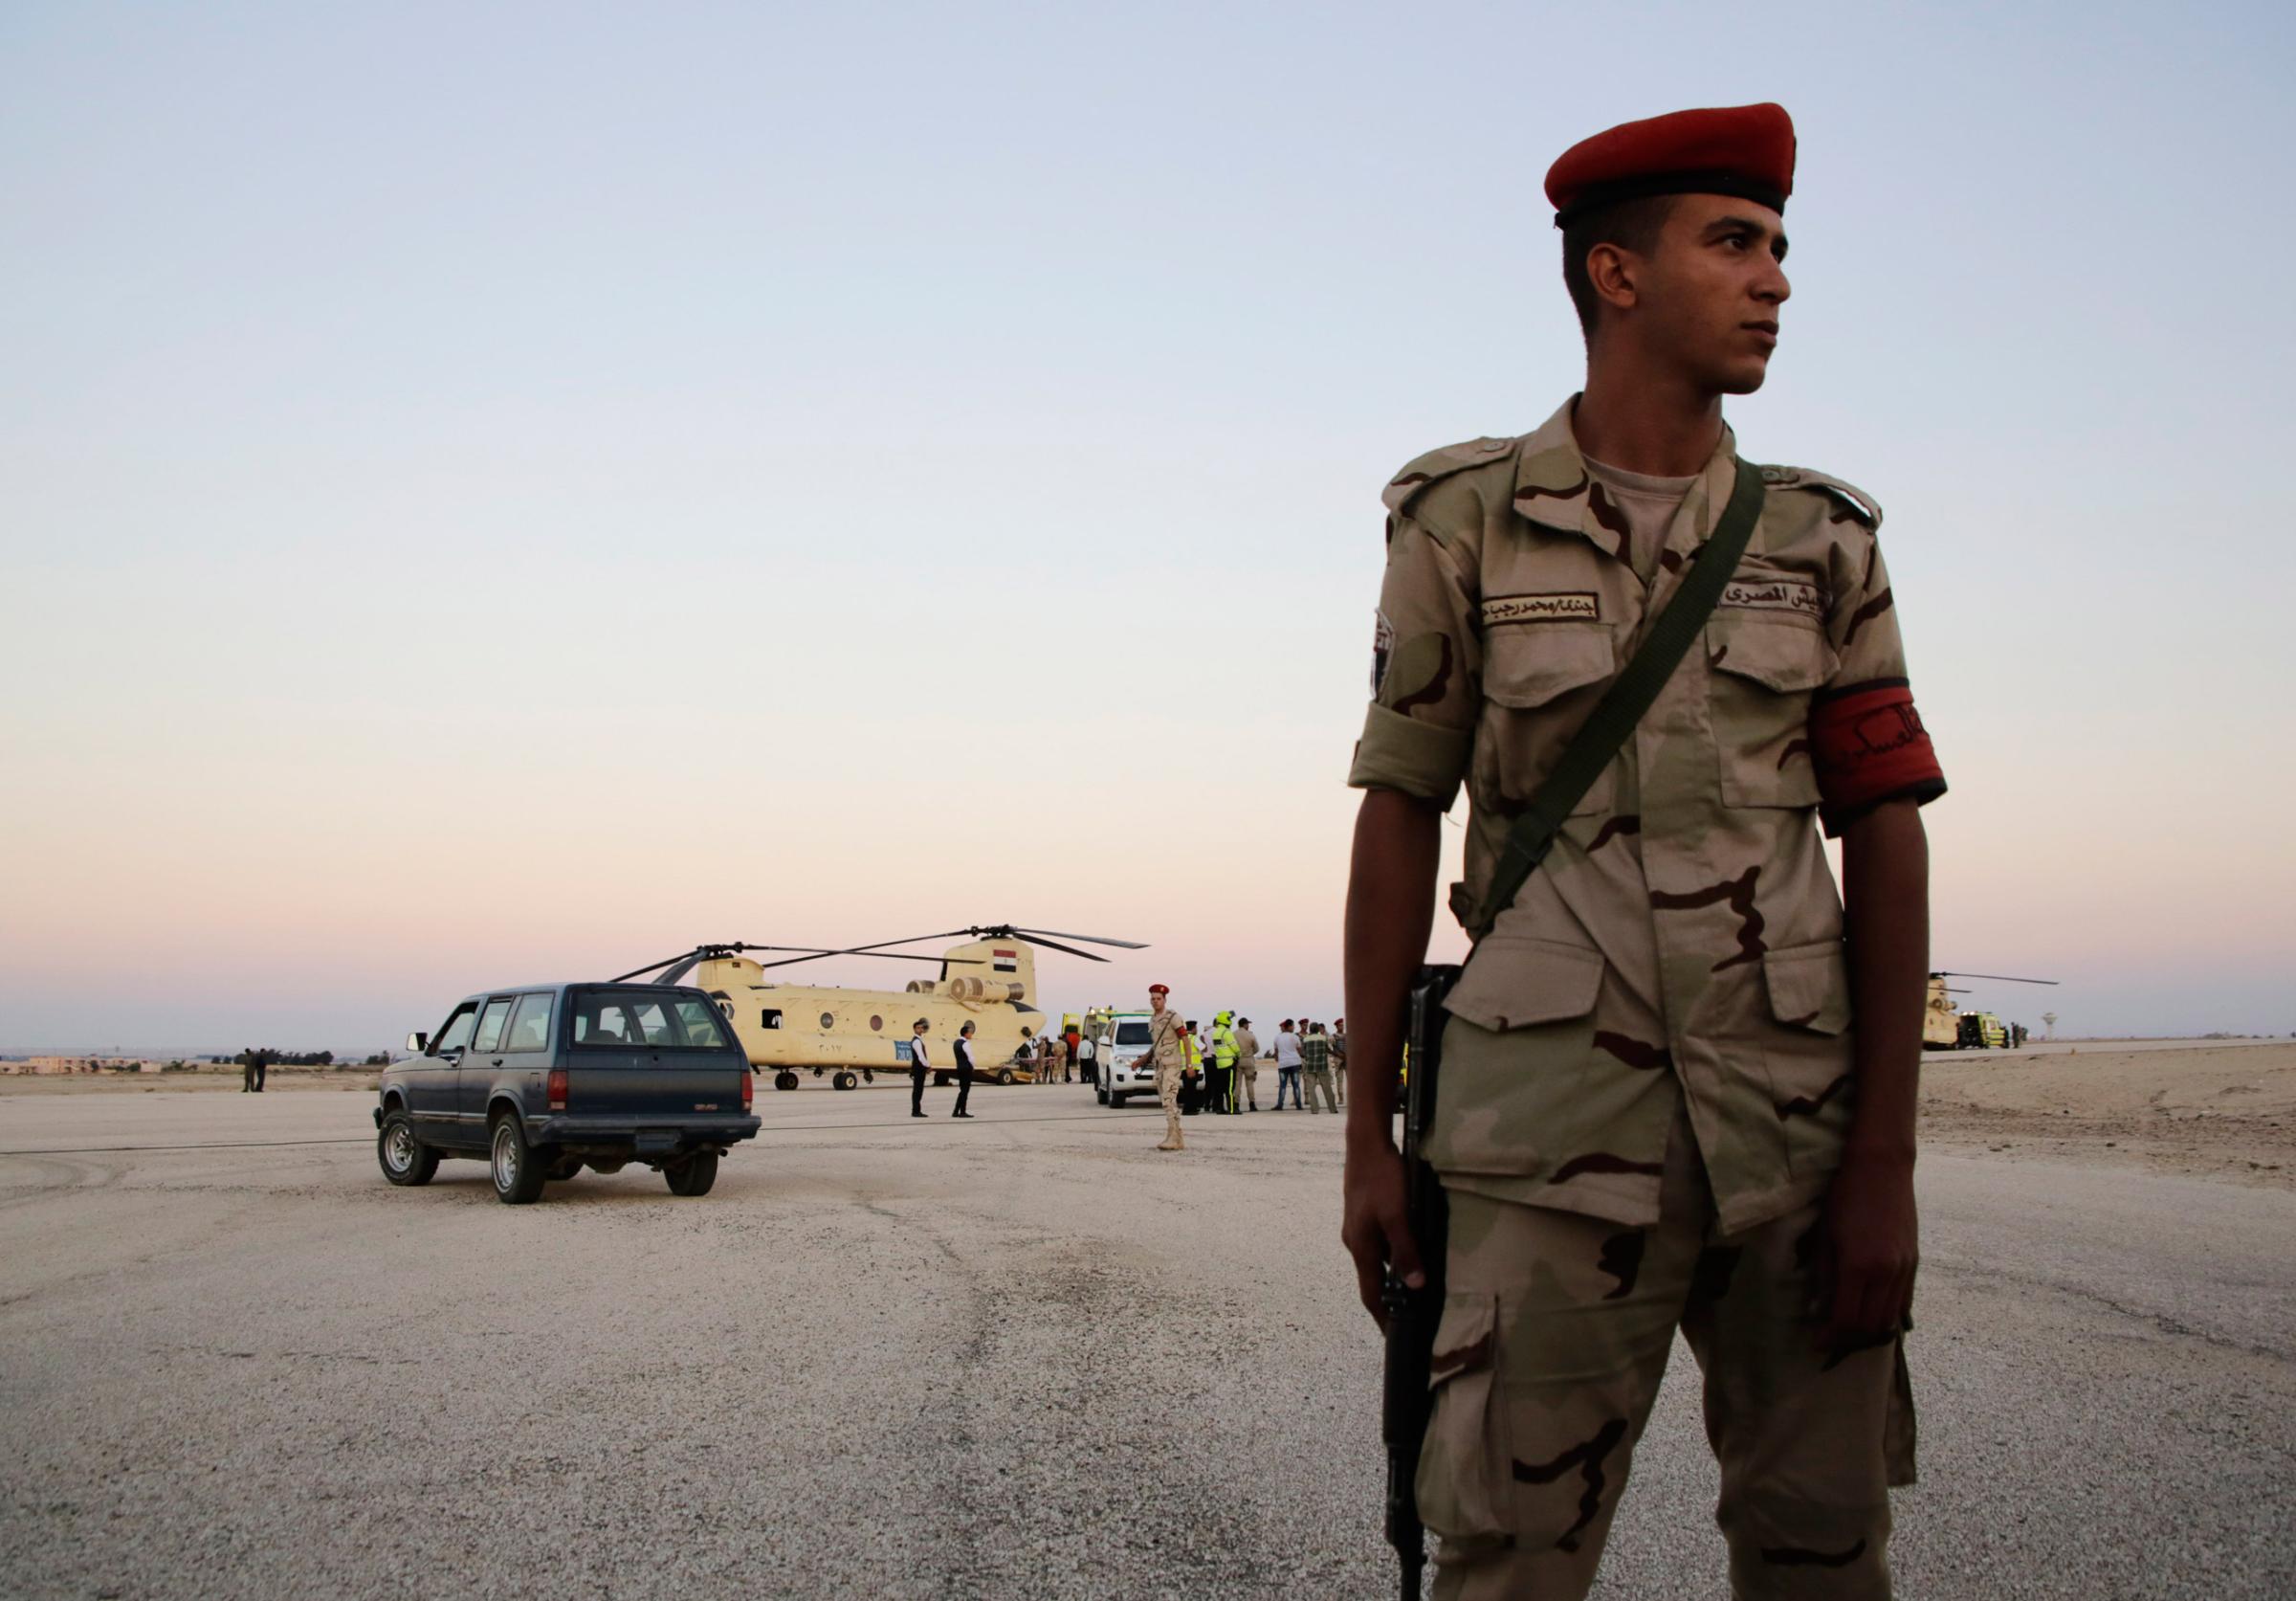 An Egyptian soldier stands guard as emergency workers unload bodies of victims from the crash of a Russian aircraft over the Sinai peninsula from a police helicopter to ambulances at Kabrit military airport, some 20 miles north of Suez, Egypt, Saturday, Oct. 31, 2015. A Russian Metrojet plane crashed Saturday morning in a mountainous region in the Sinai after taking off from Sharm el-Sheikh, killing all 224 people aboard. Officials said the pilot had reported a technical problem and was looking to make an emergency landing before radio contact with air traffic controllers went dead. (AP Photo/Amr Nabil)